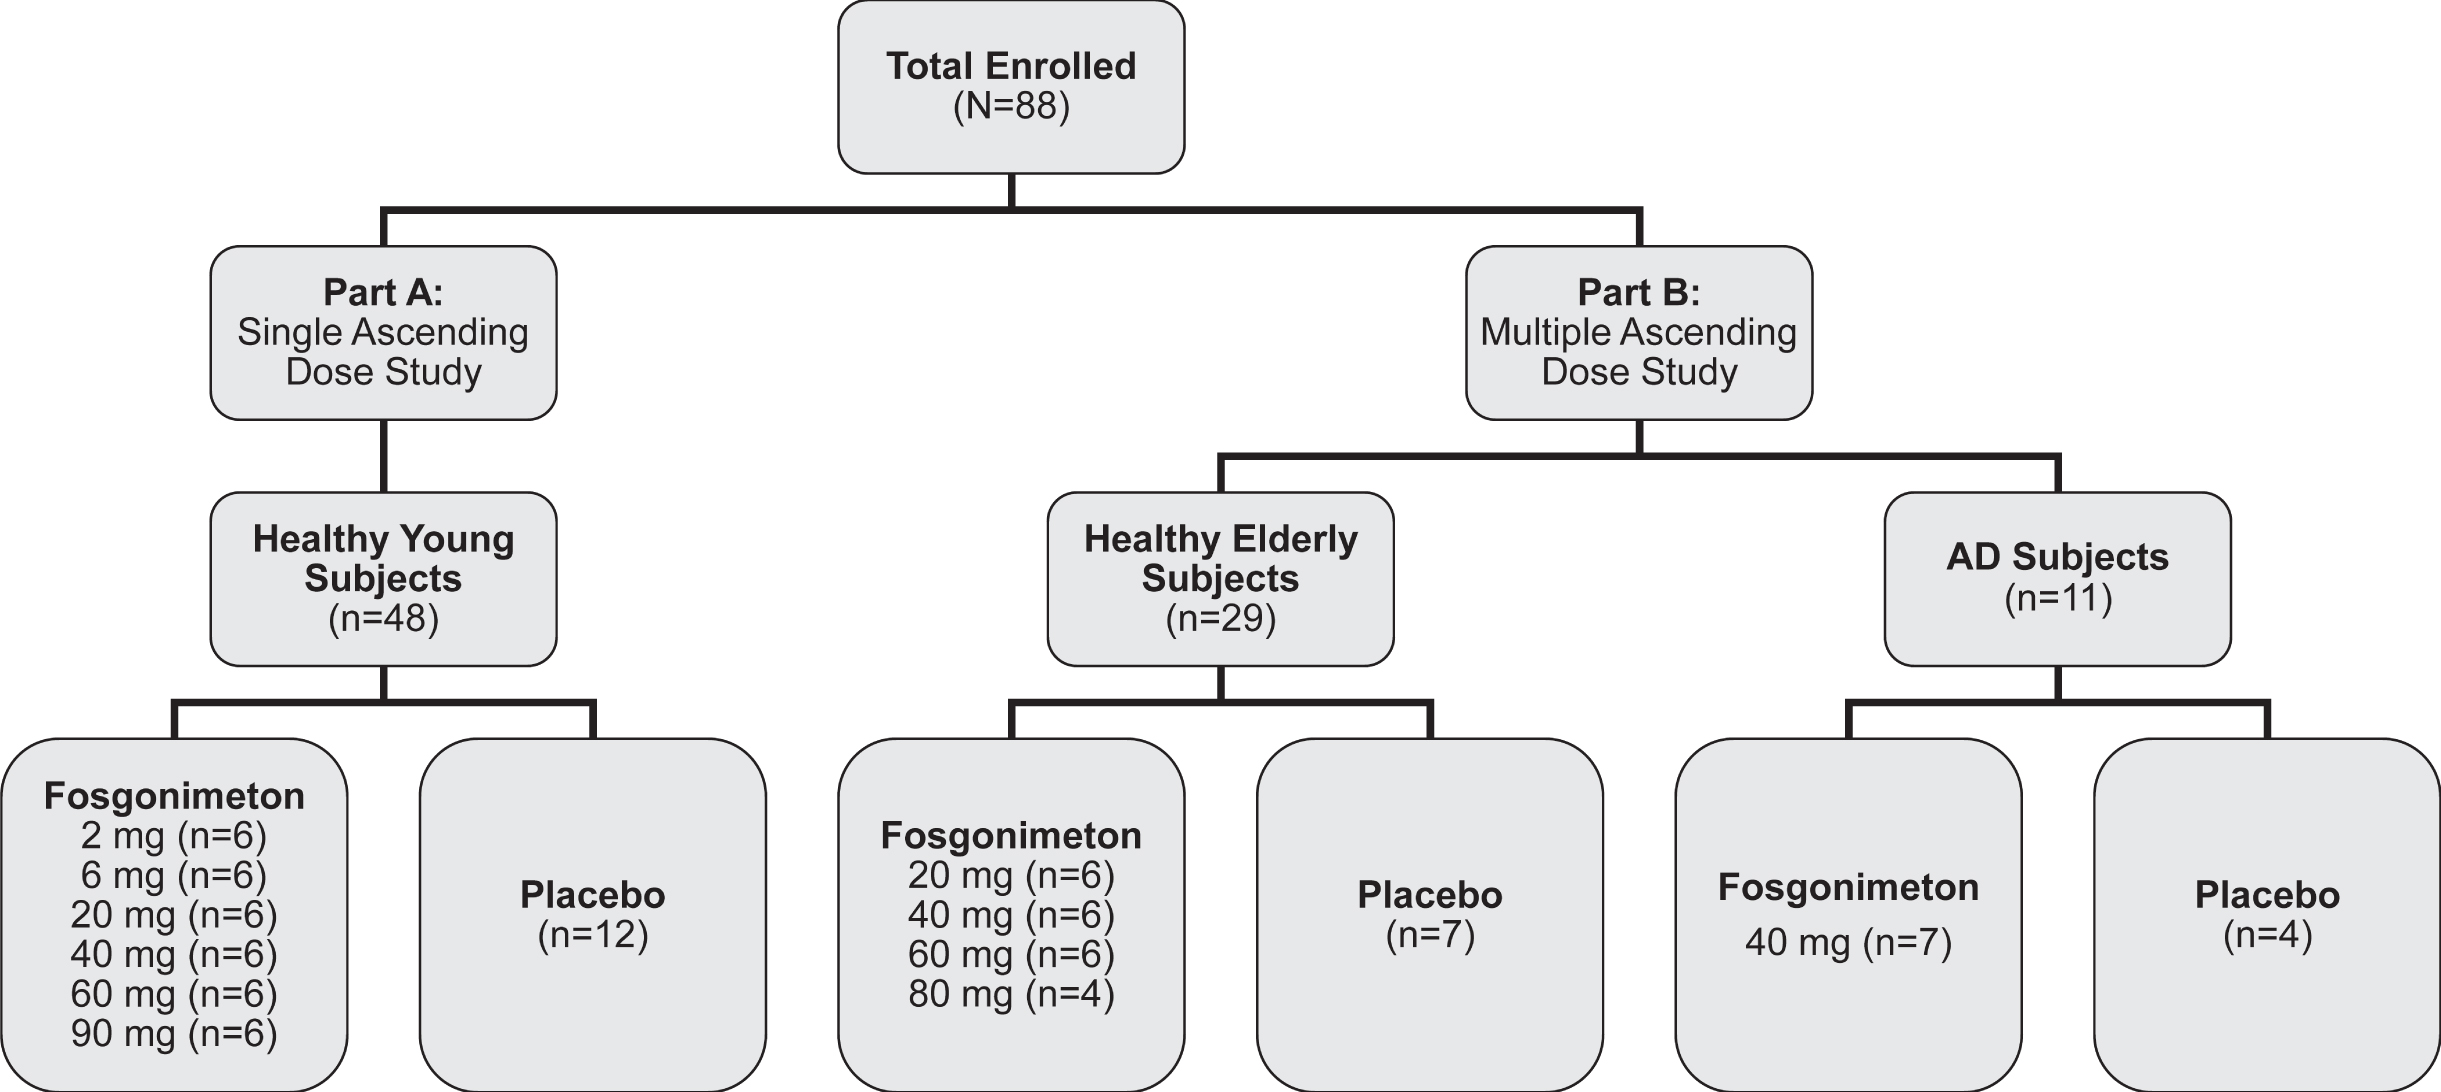 Study design. The phase I trial enrolled a total of 88 subjects, including the single ascending dose study (part A, 20–90 mg fosgonimeton versus placebo) and the multiple ascending dose study (part B, 20–80 mg fosgonimeton versus placebo) including a fixed-dose study in Alzheimer’s disease (AD) subjects.